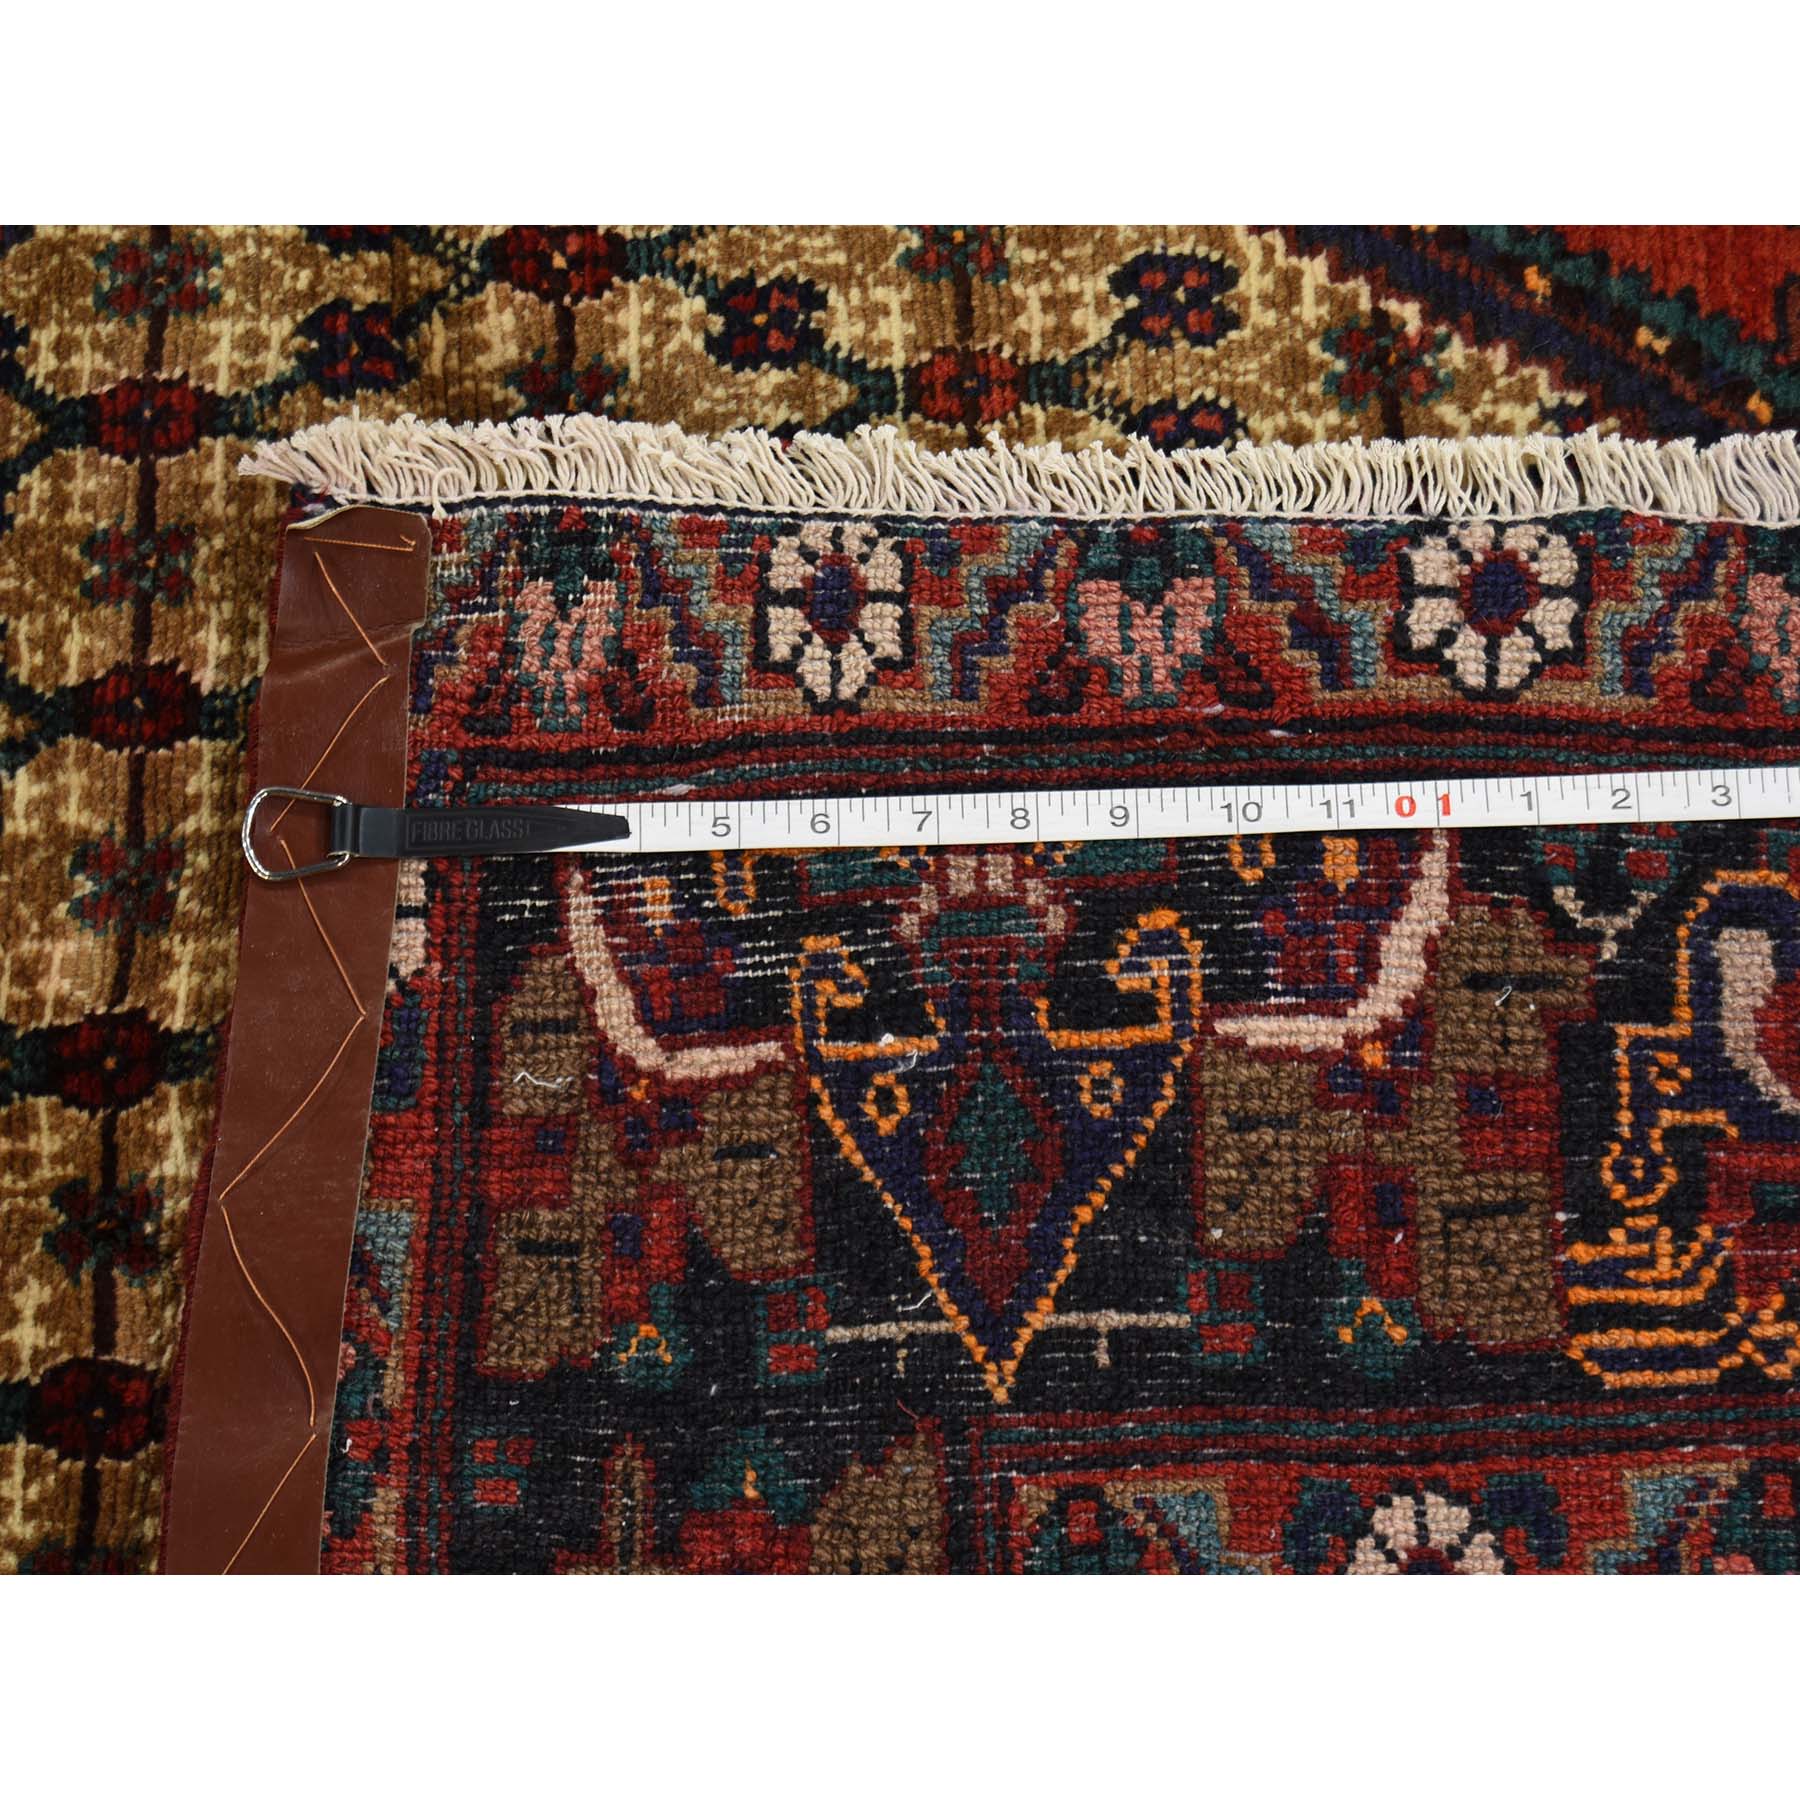 5-4--x10- Hand-Knotted Persian Hamadan Camel Hair Wide Runner Rug 